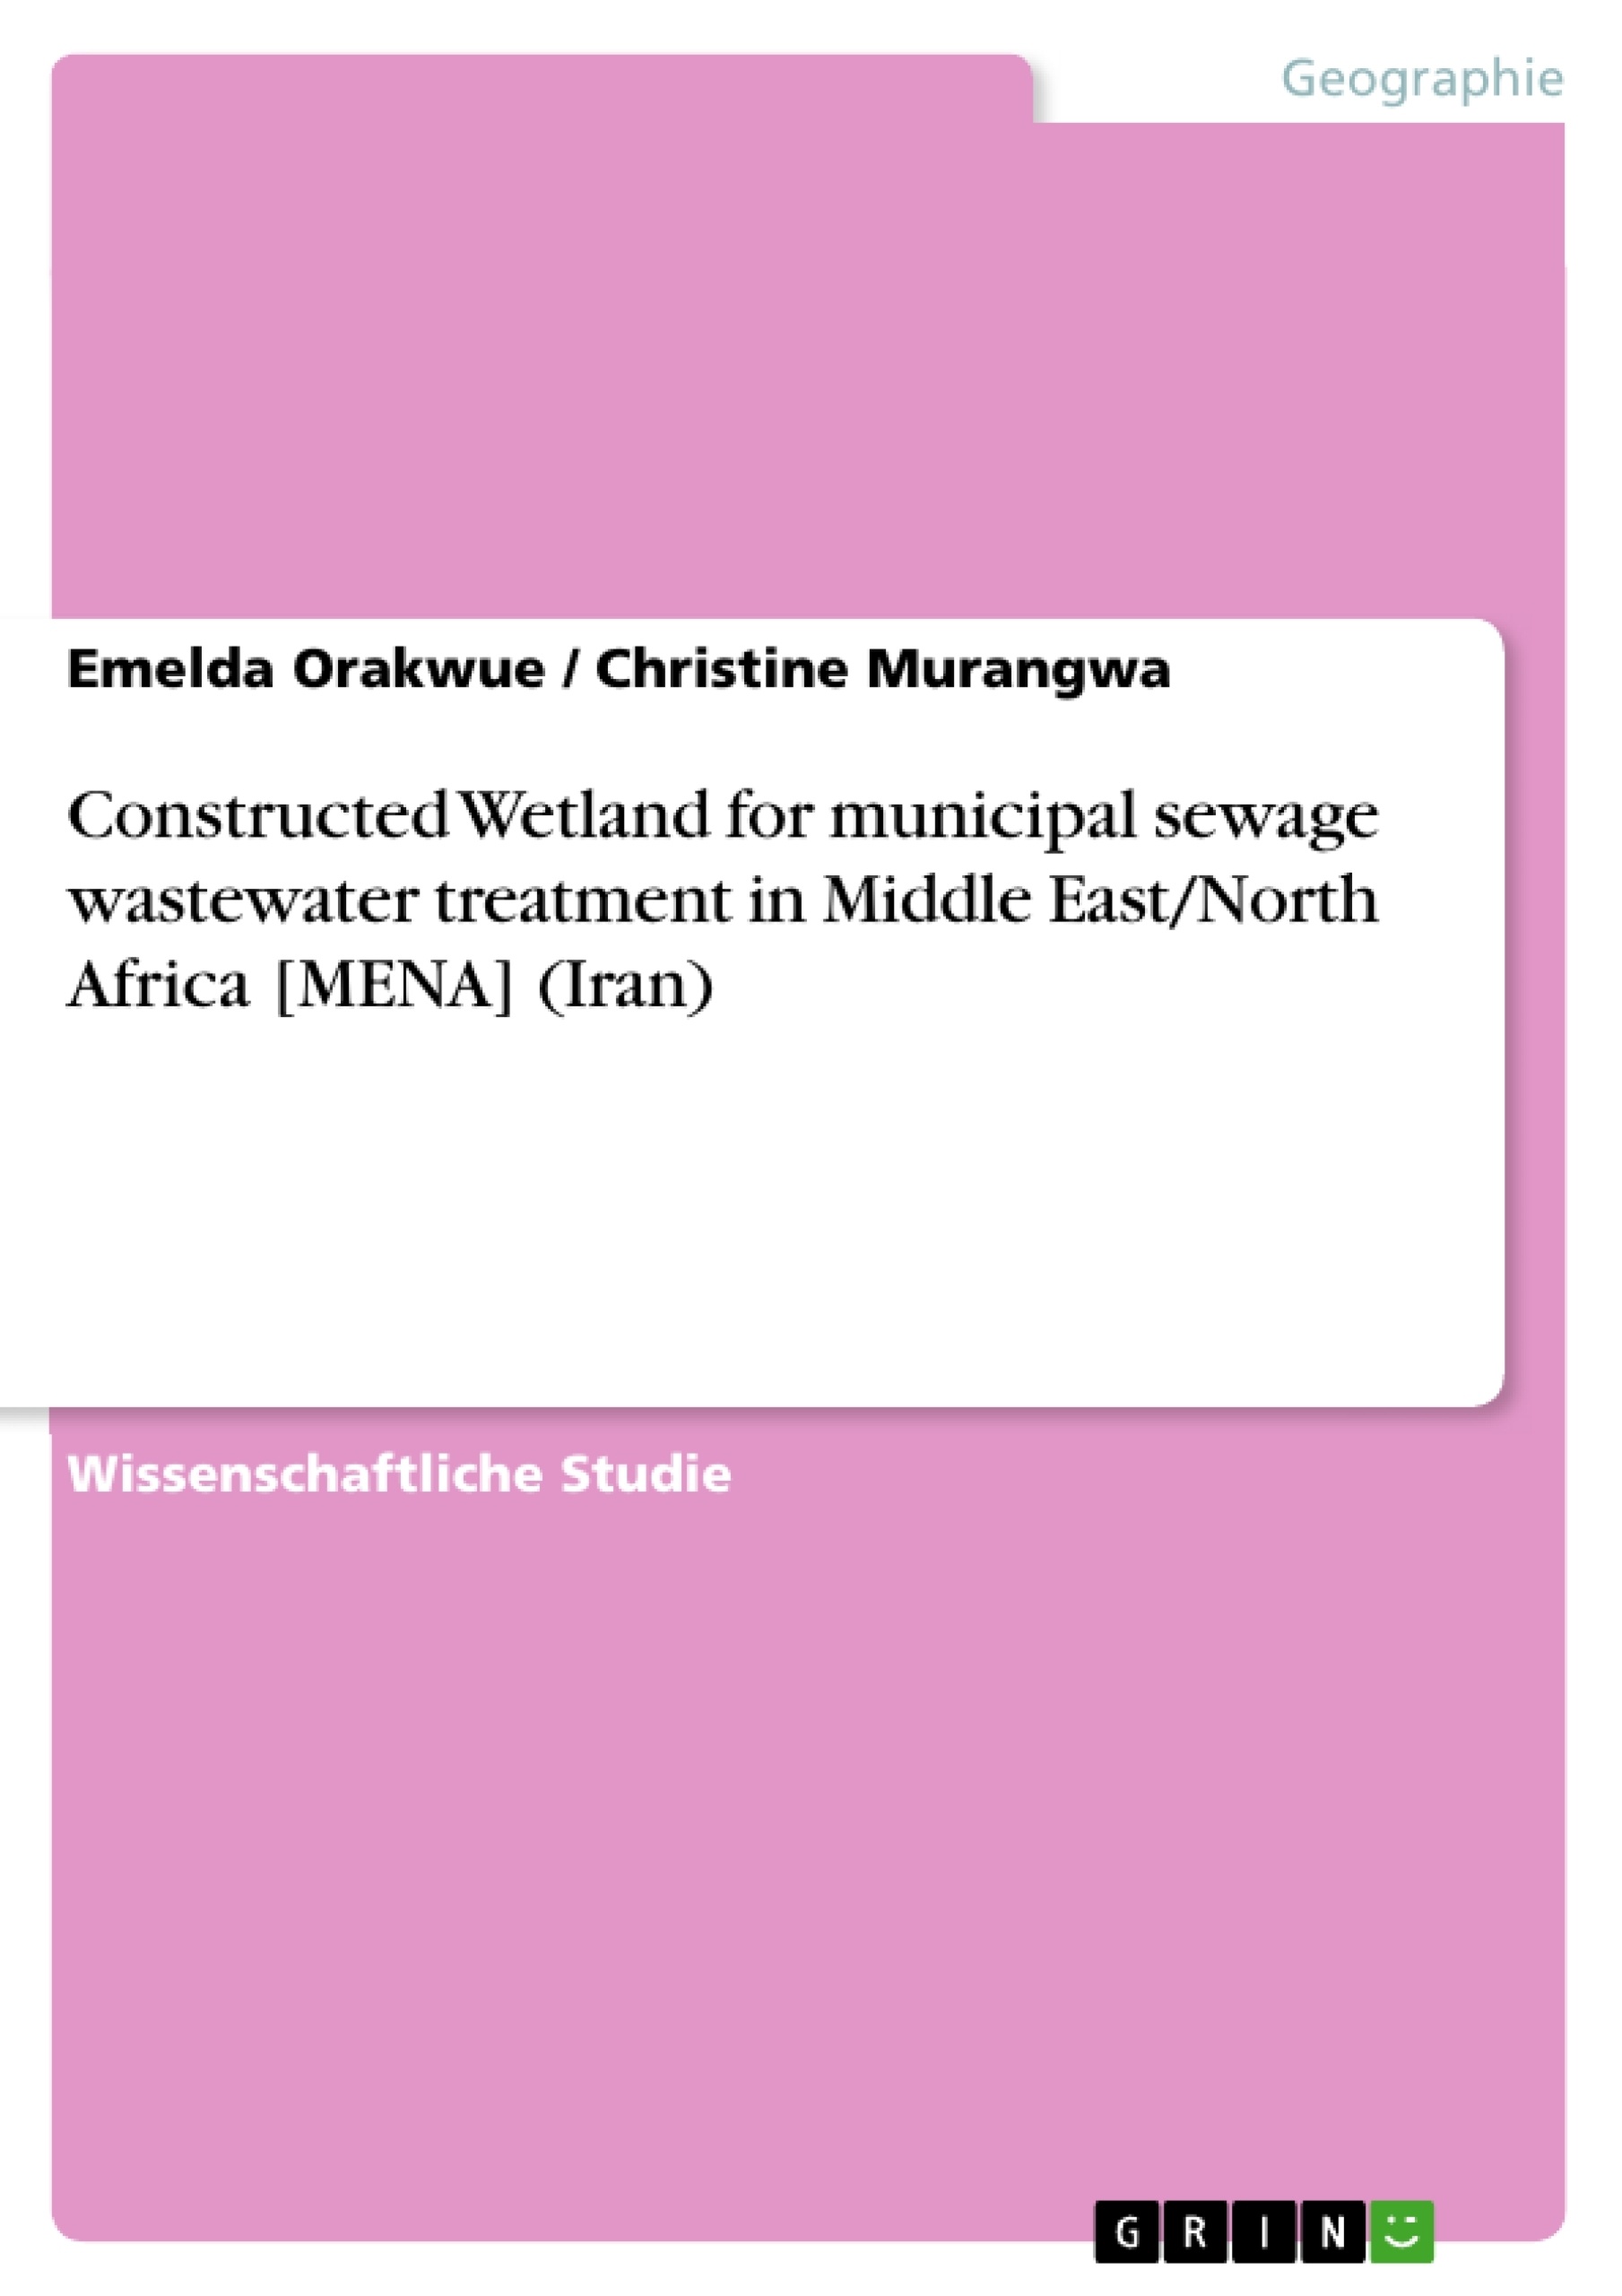 Title: Constructed Wetland for municipal sewage wastewater treatment in Middle East/North Africa [MENA] (Iran)